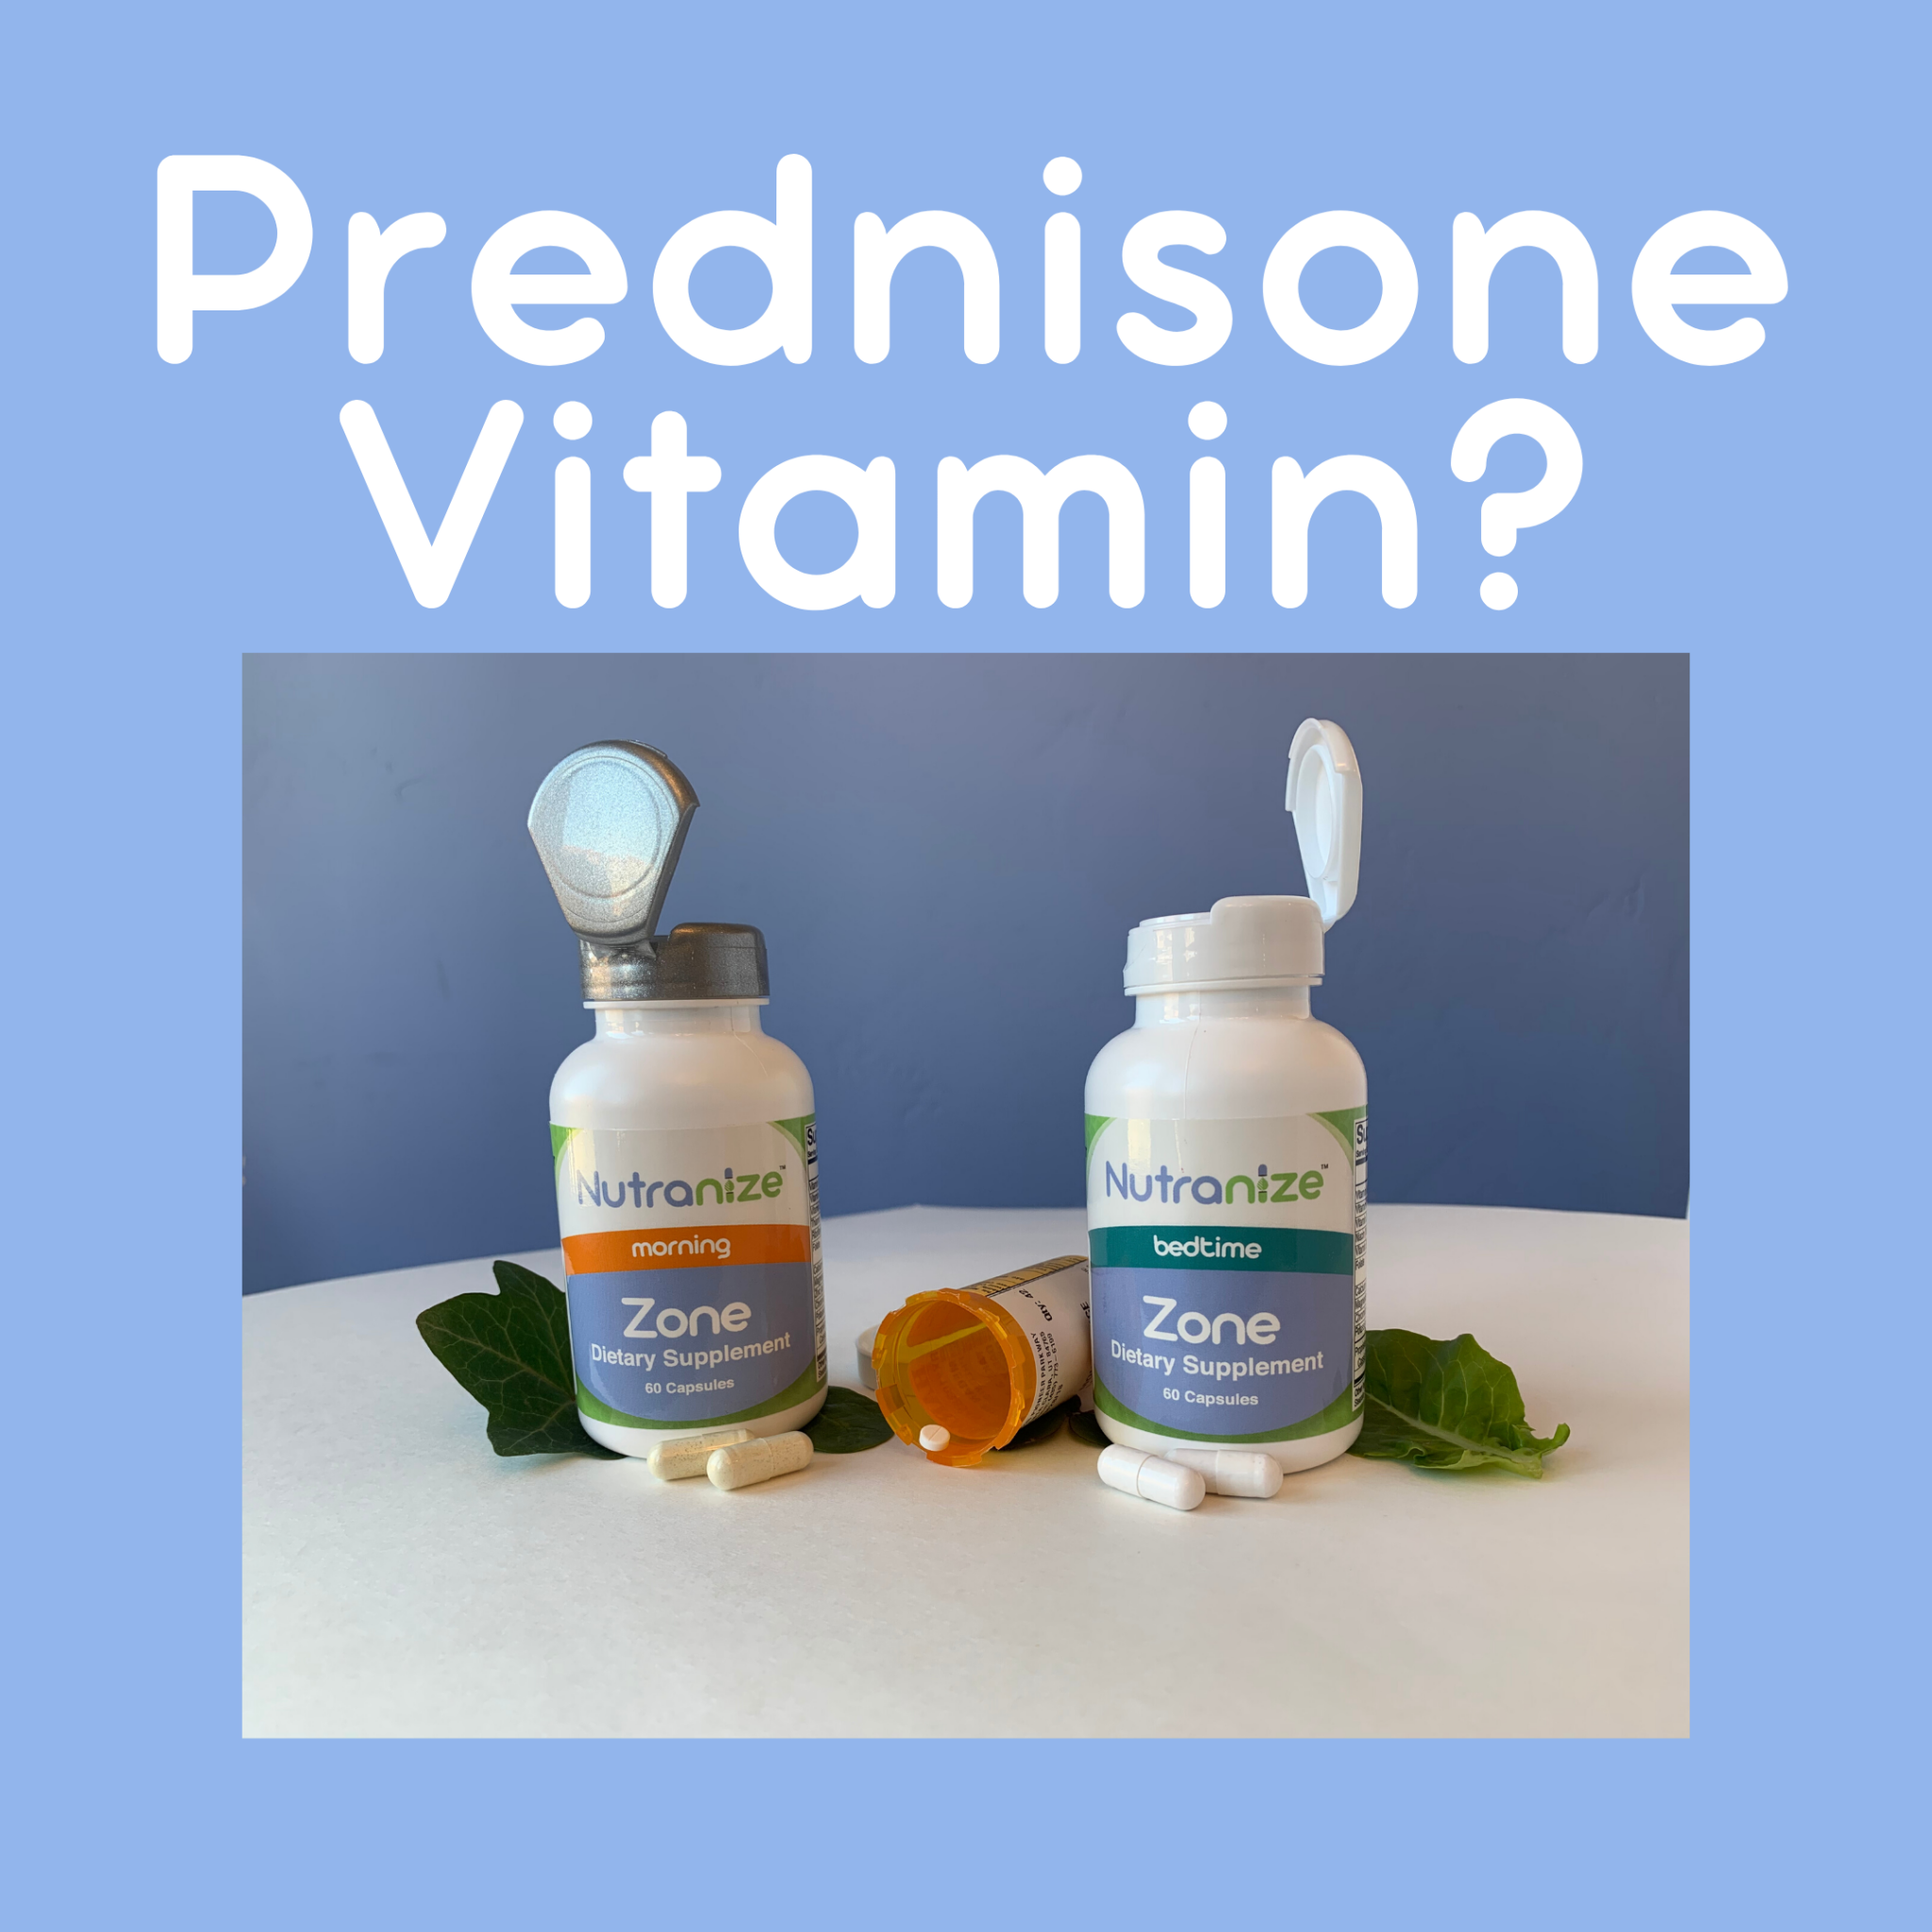 Prednisone Vitamin? Is there such a thing?